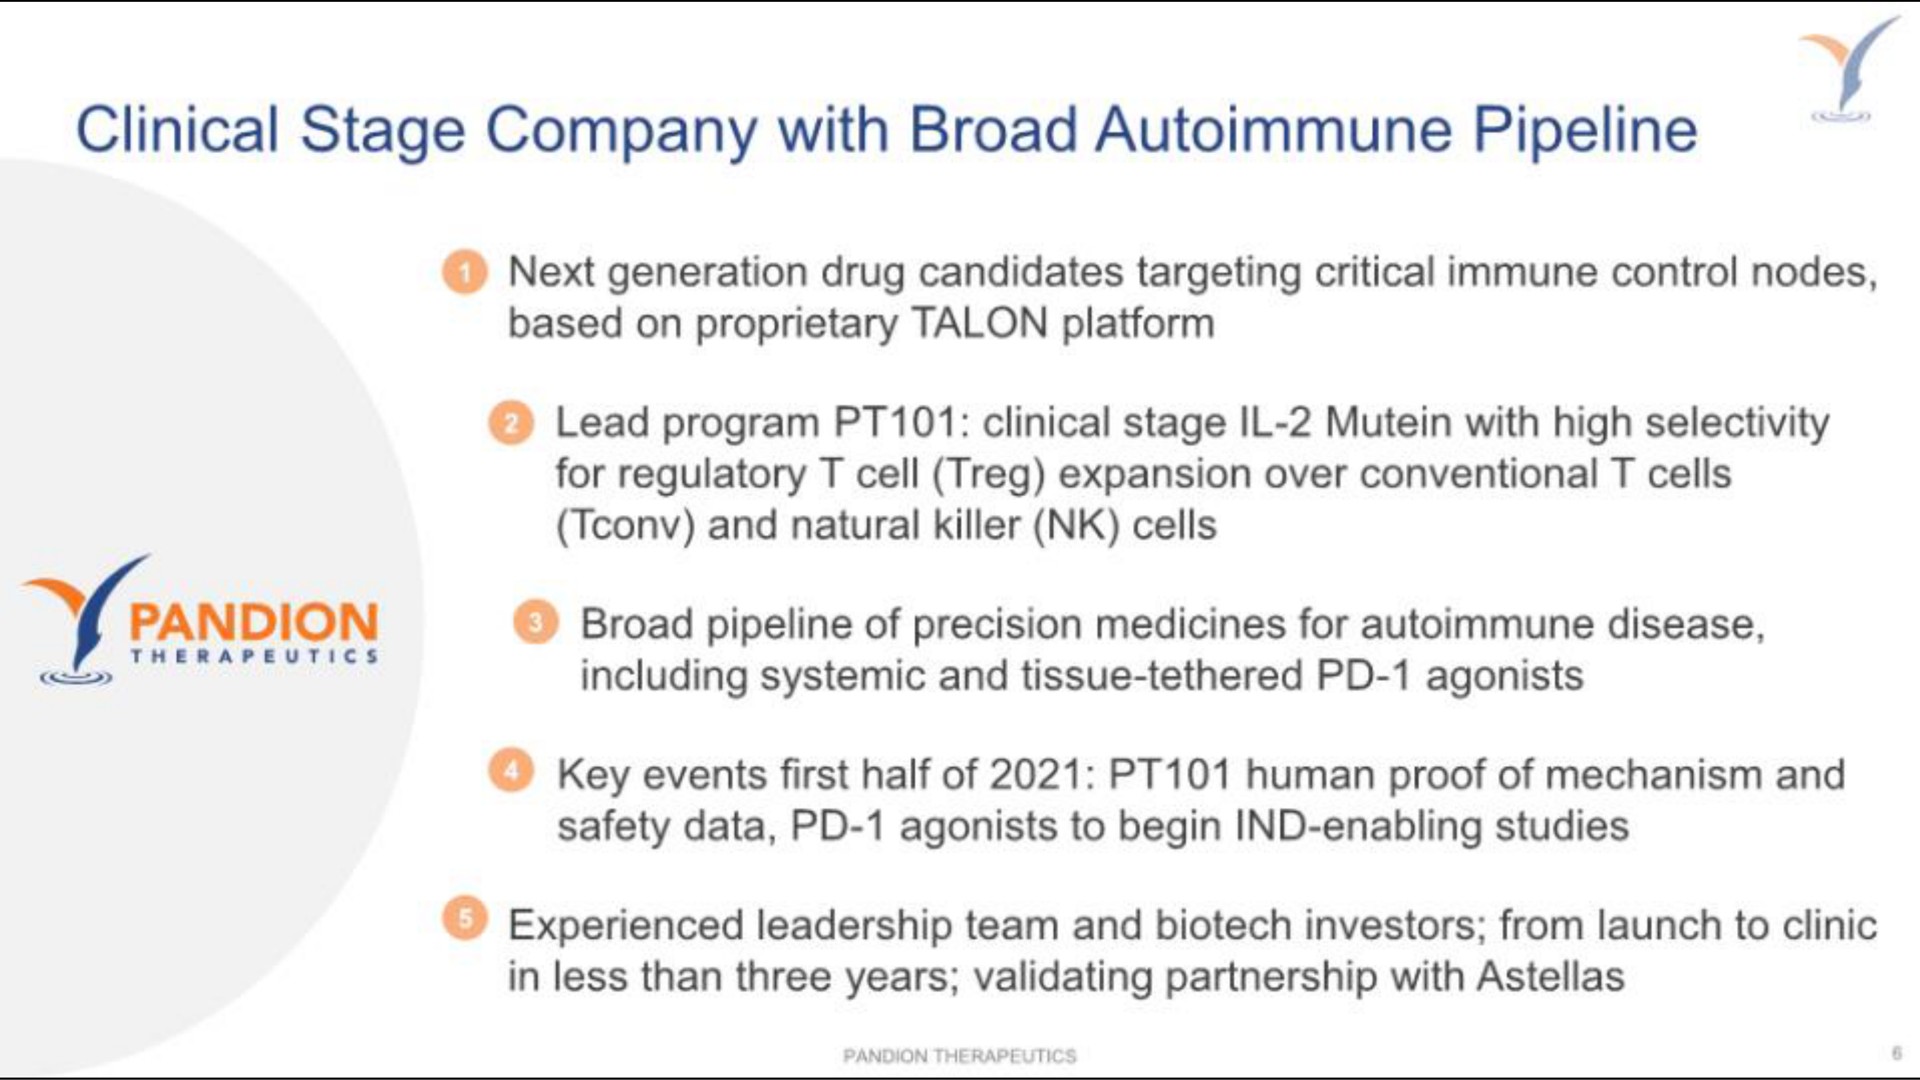 clinical stage company with broad pipeline | Pandion Therapeutics